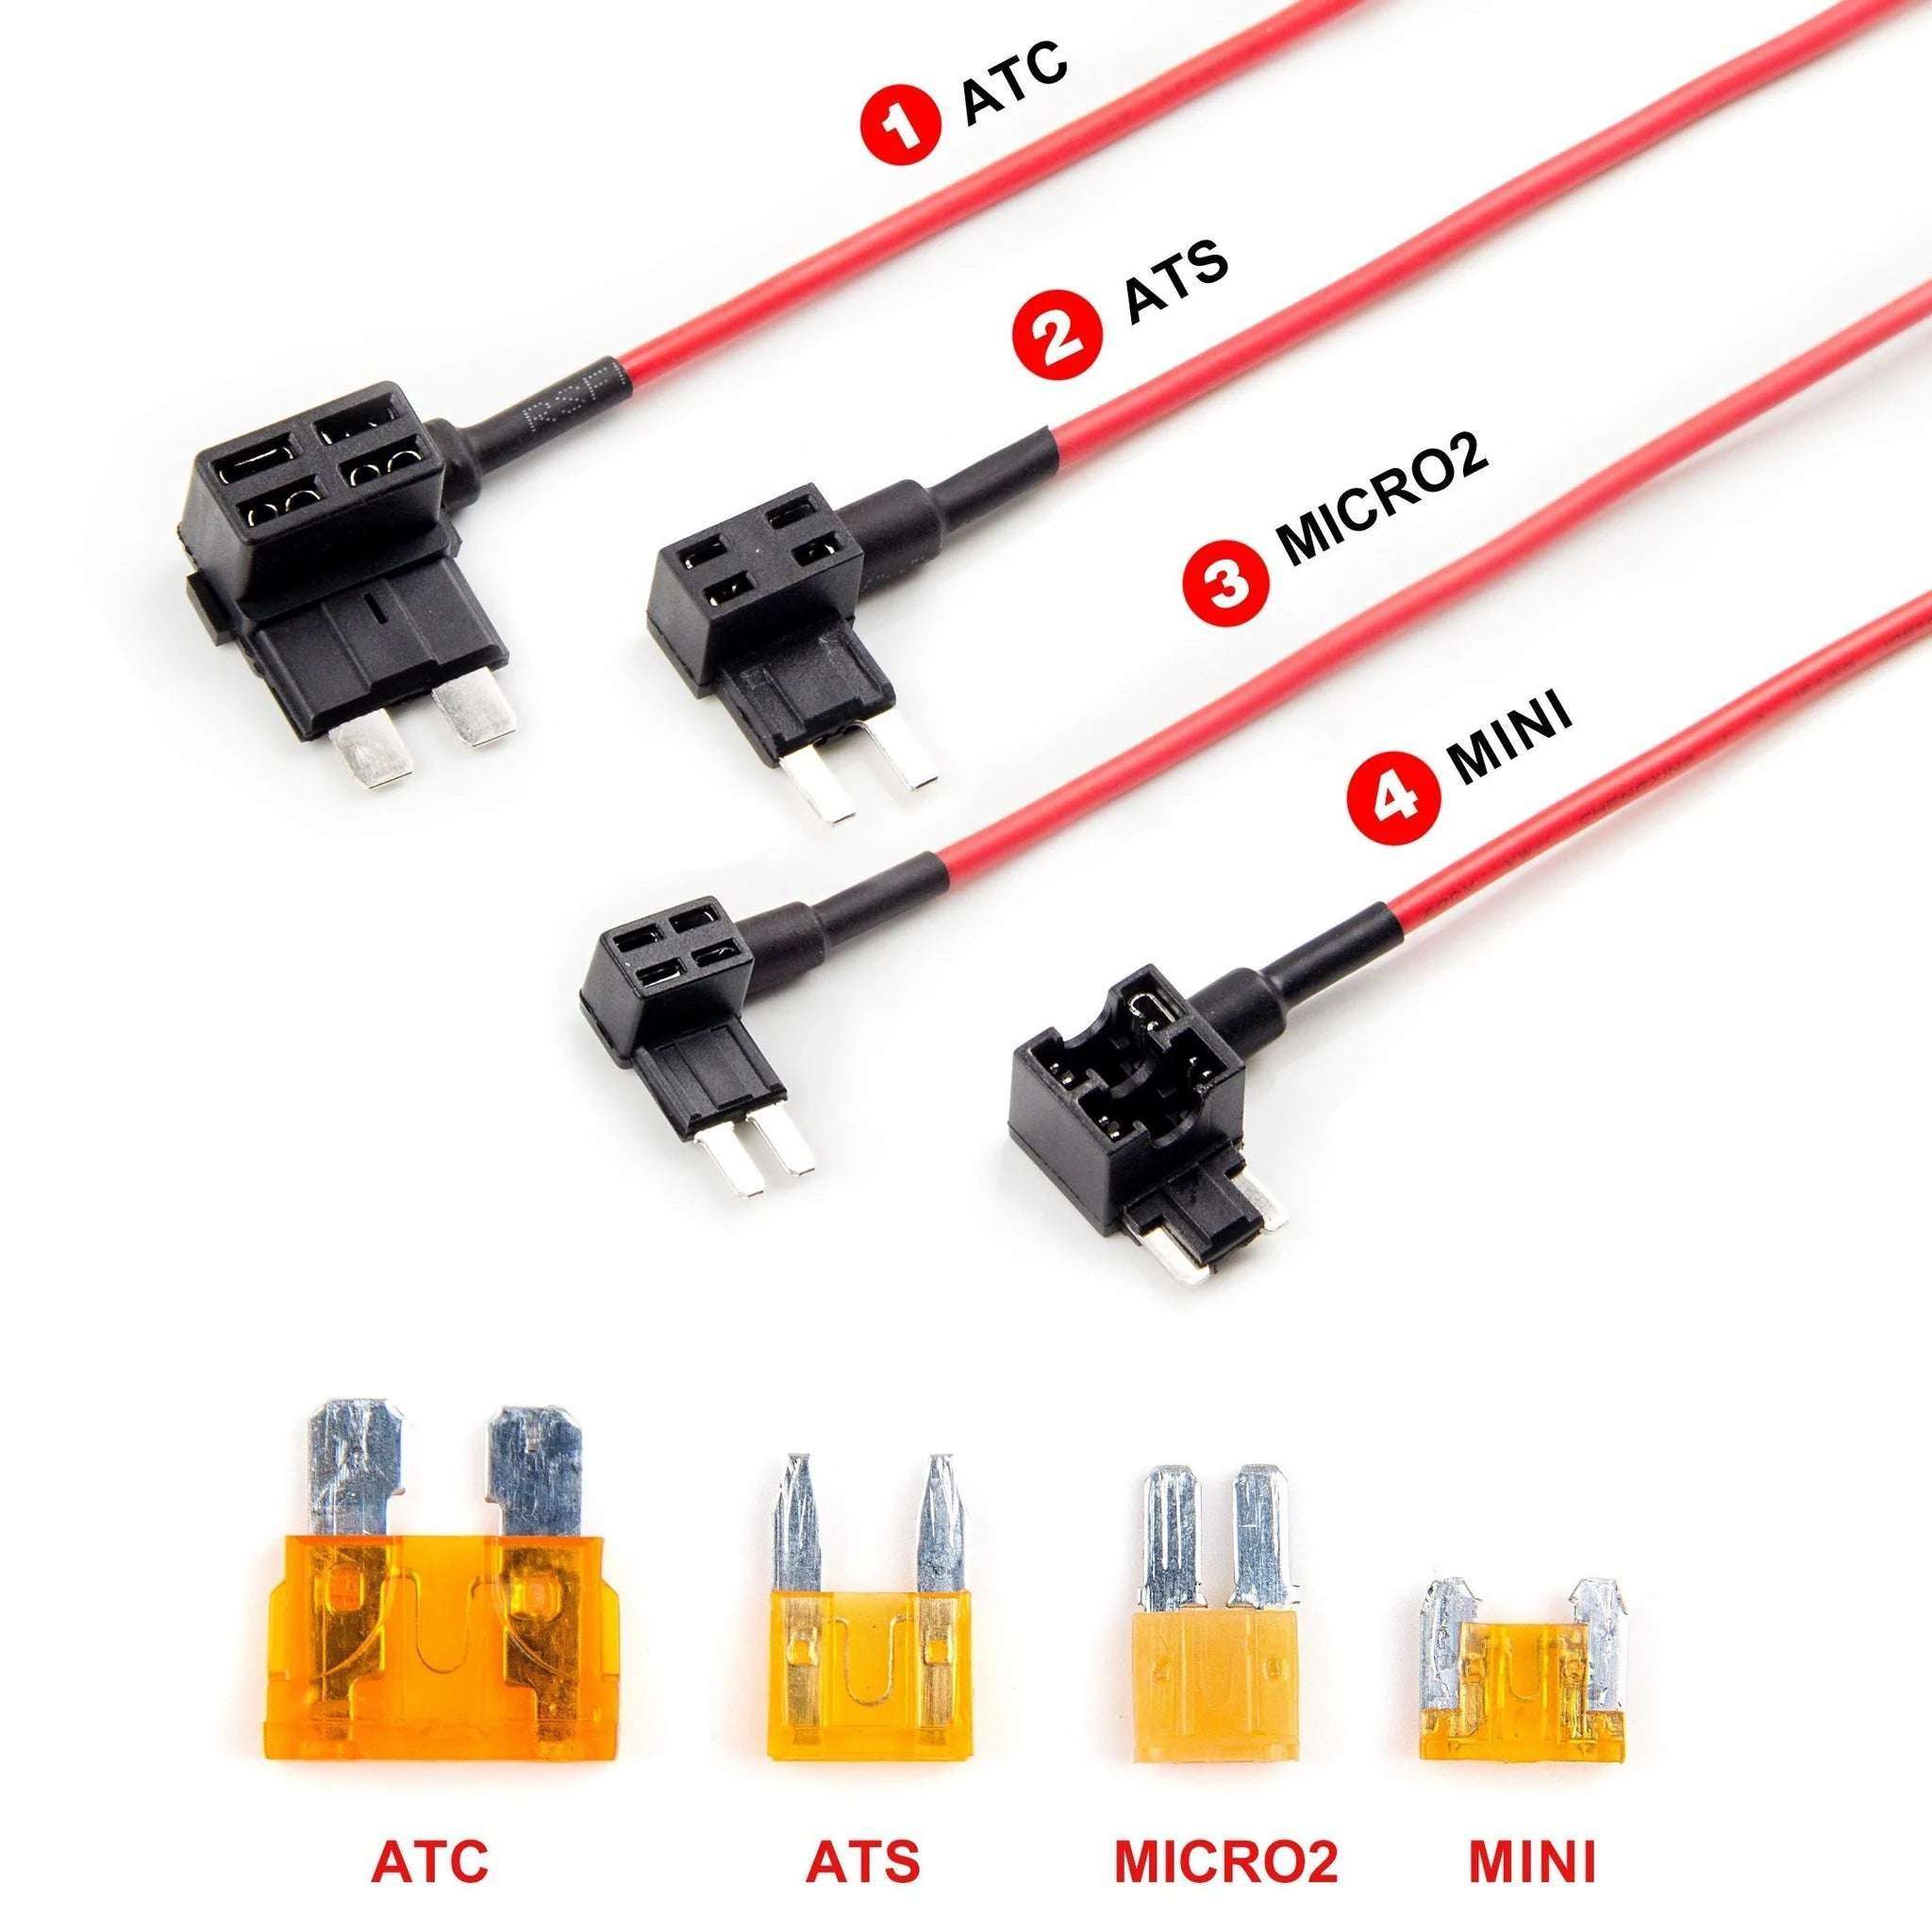 VIOFO set with 4 different fuses (attachments) for VIOFO Hardwire Kit 